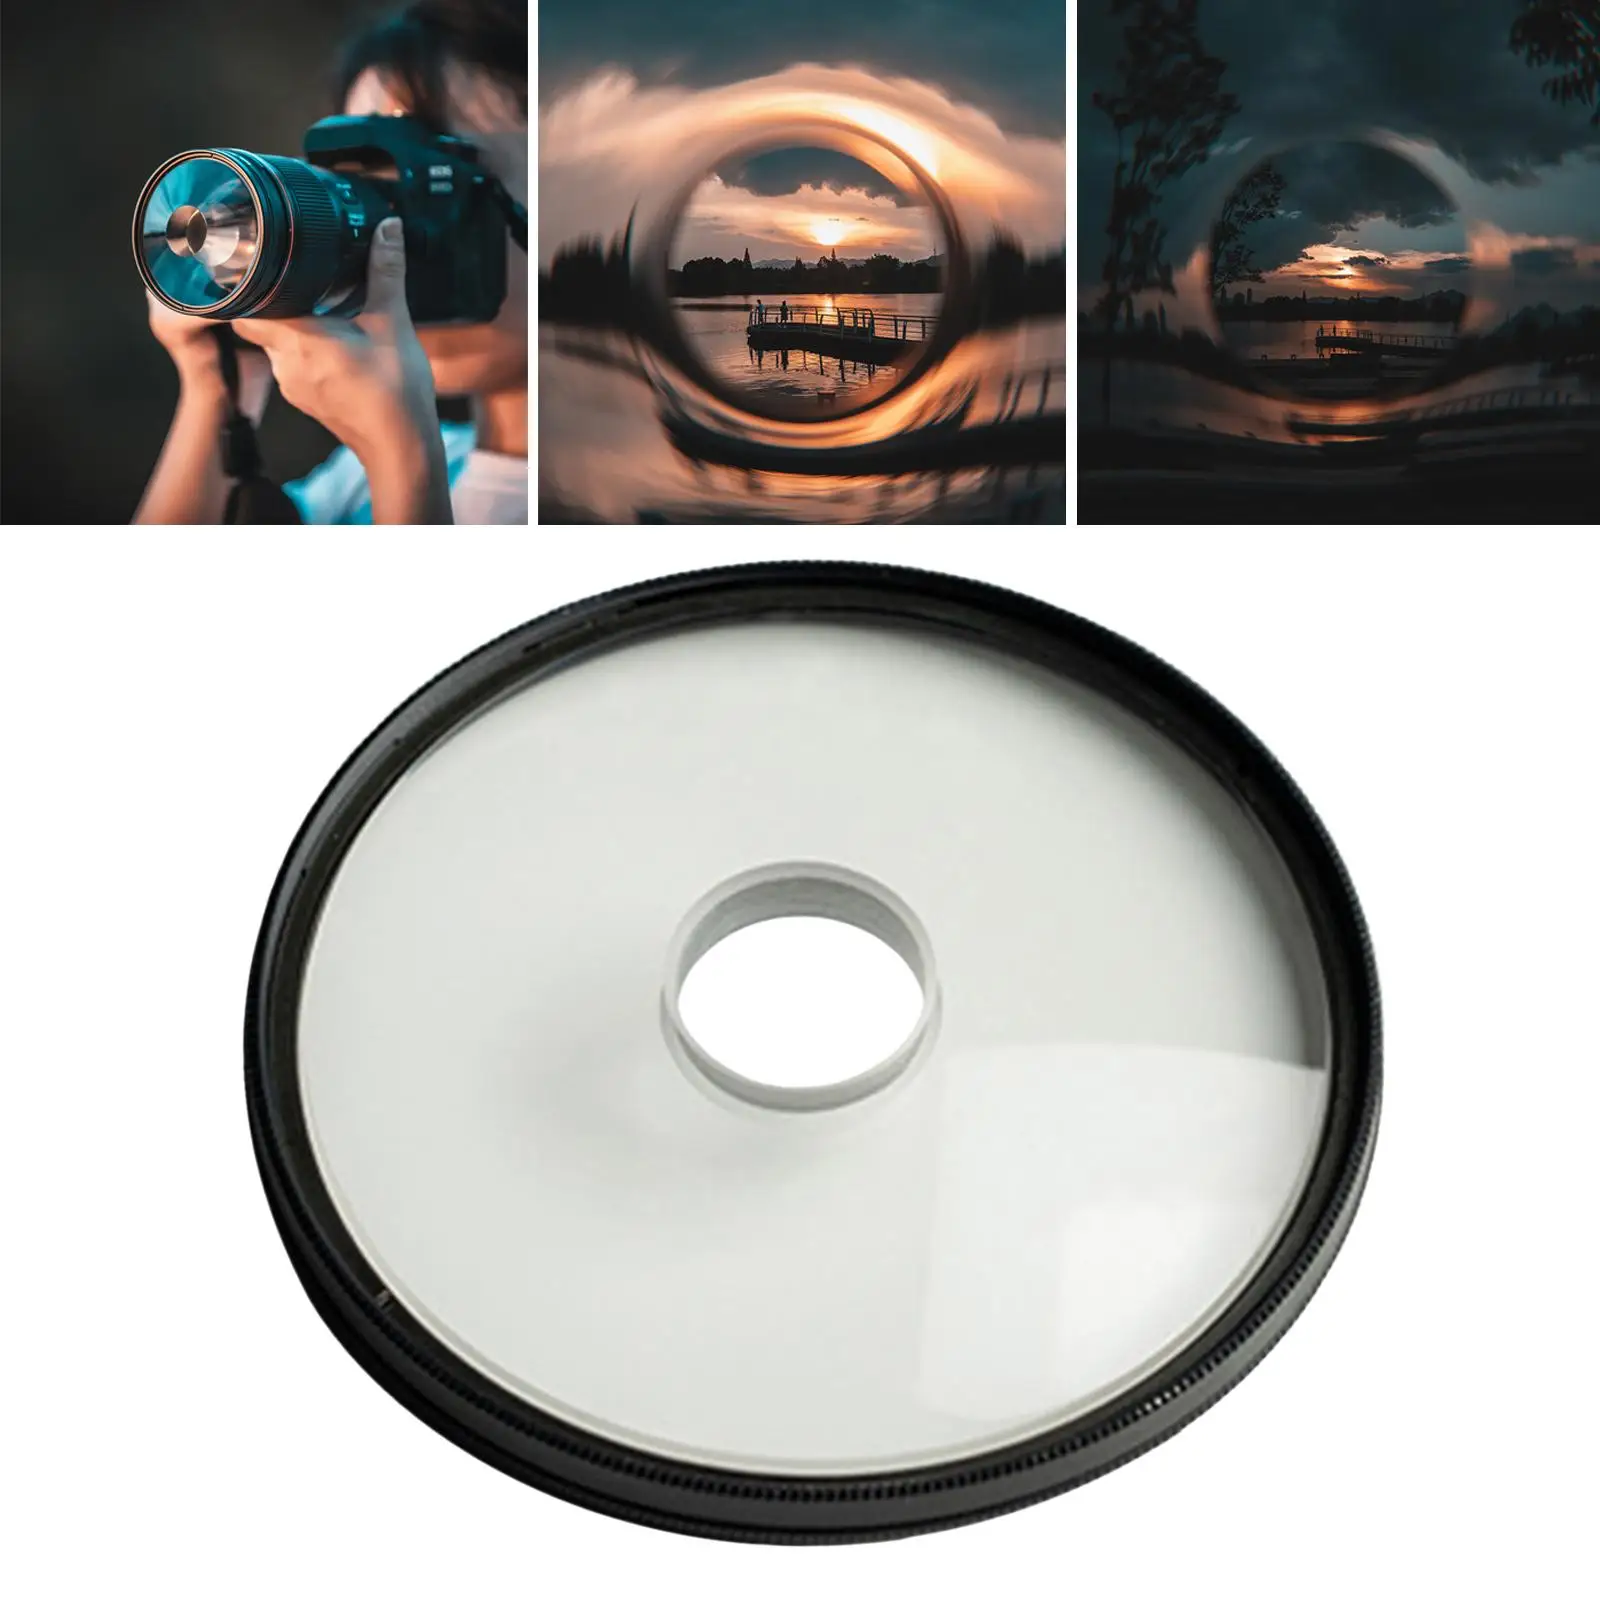 Professional Creative Photography Lens FX Filter Swirl Portrait Photography 77mm Caliber Polarizer for Photography Accessories